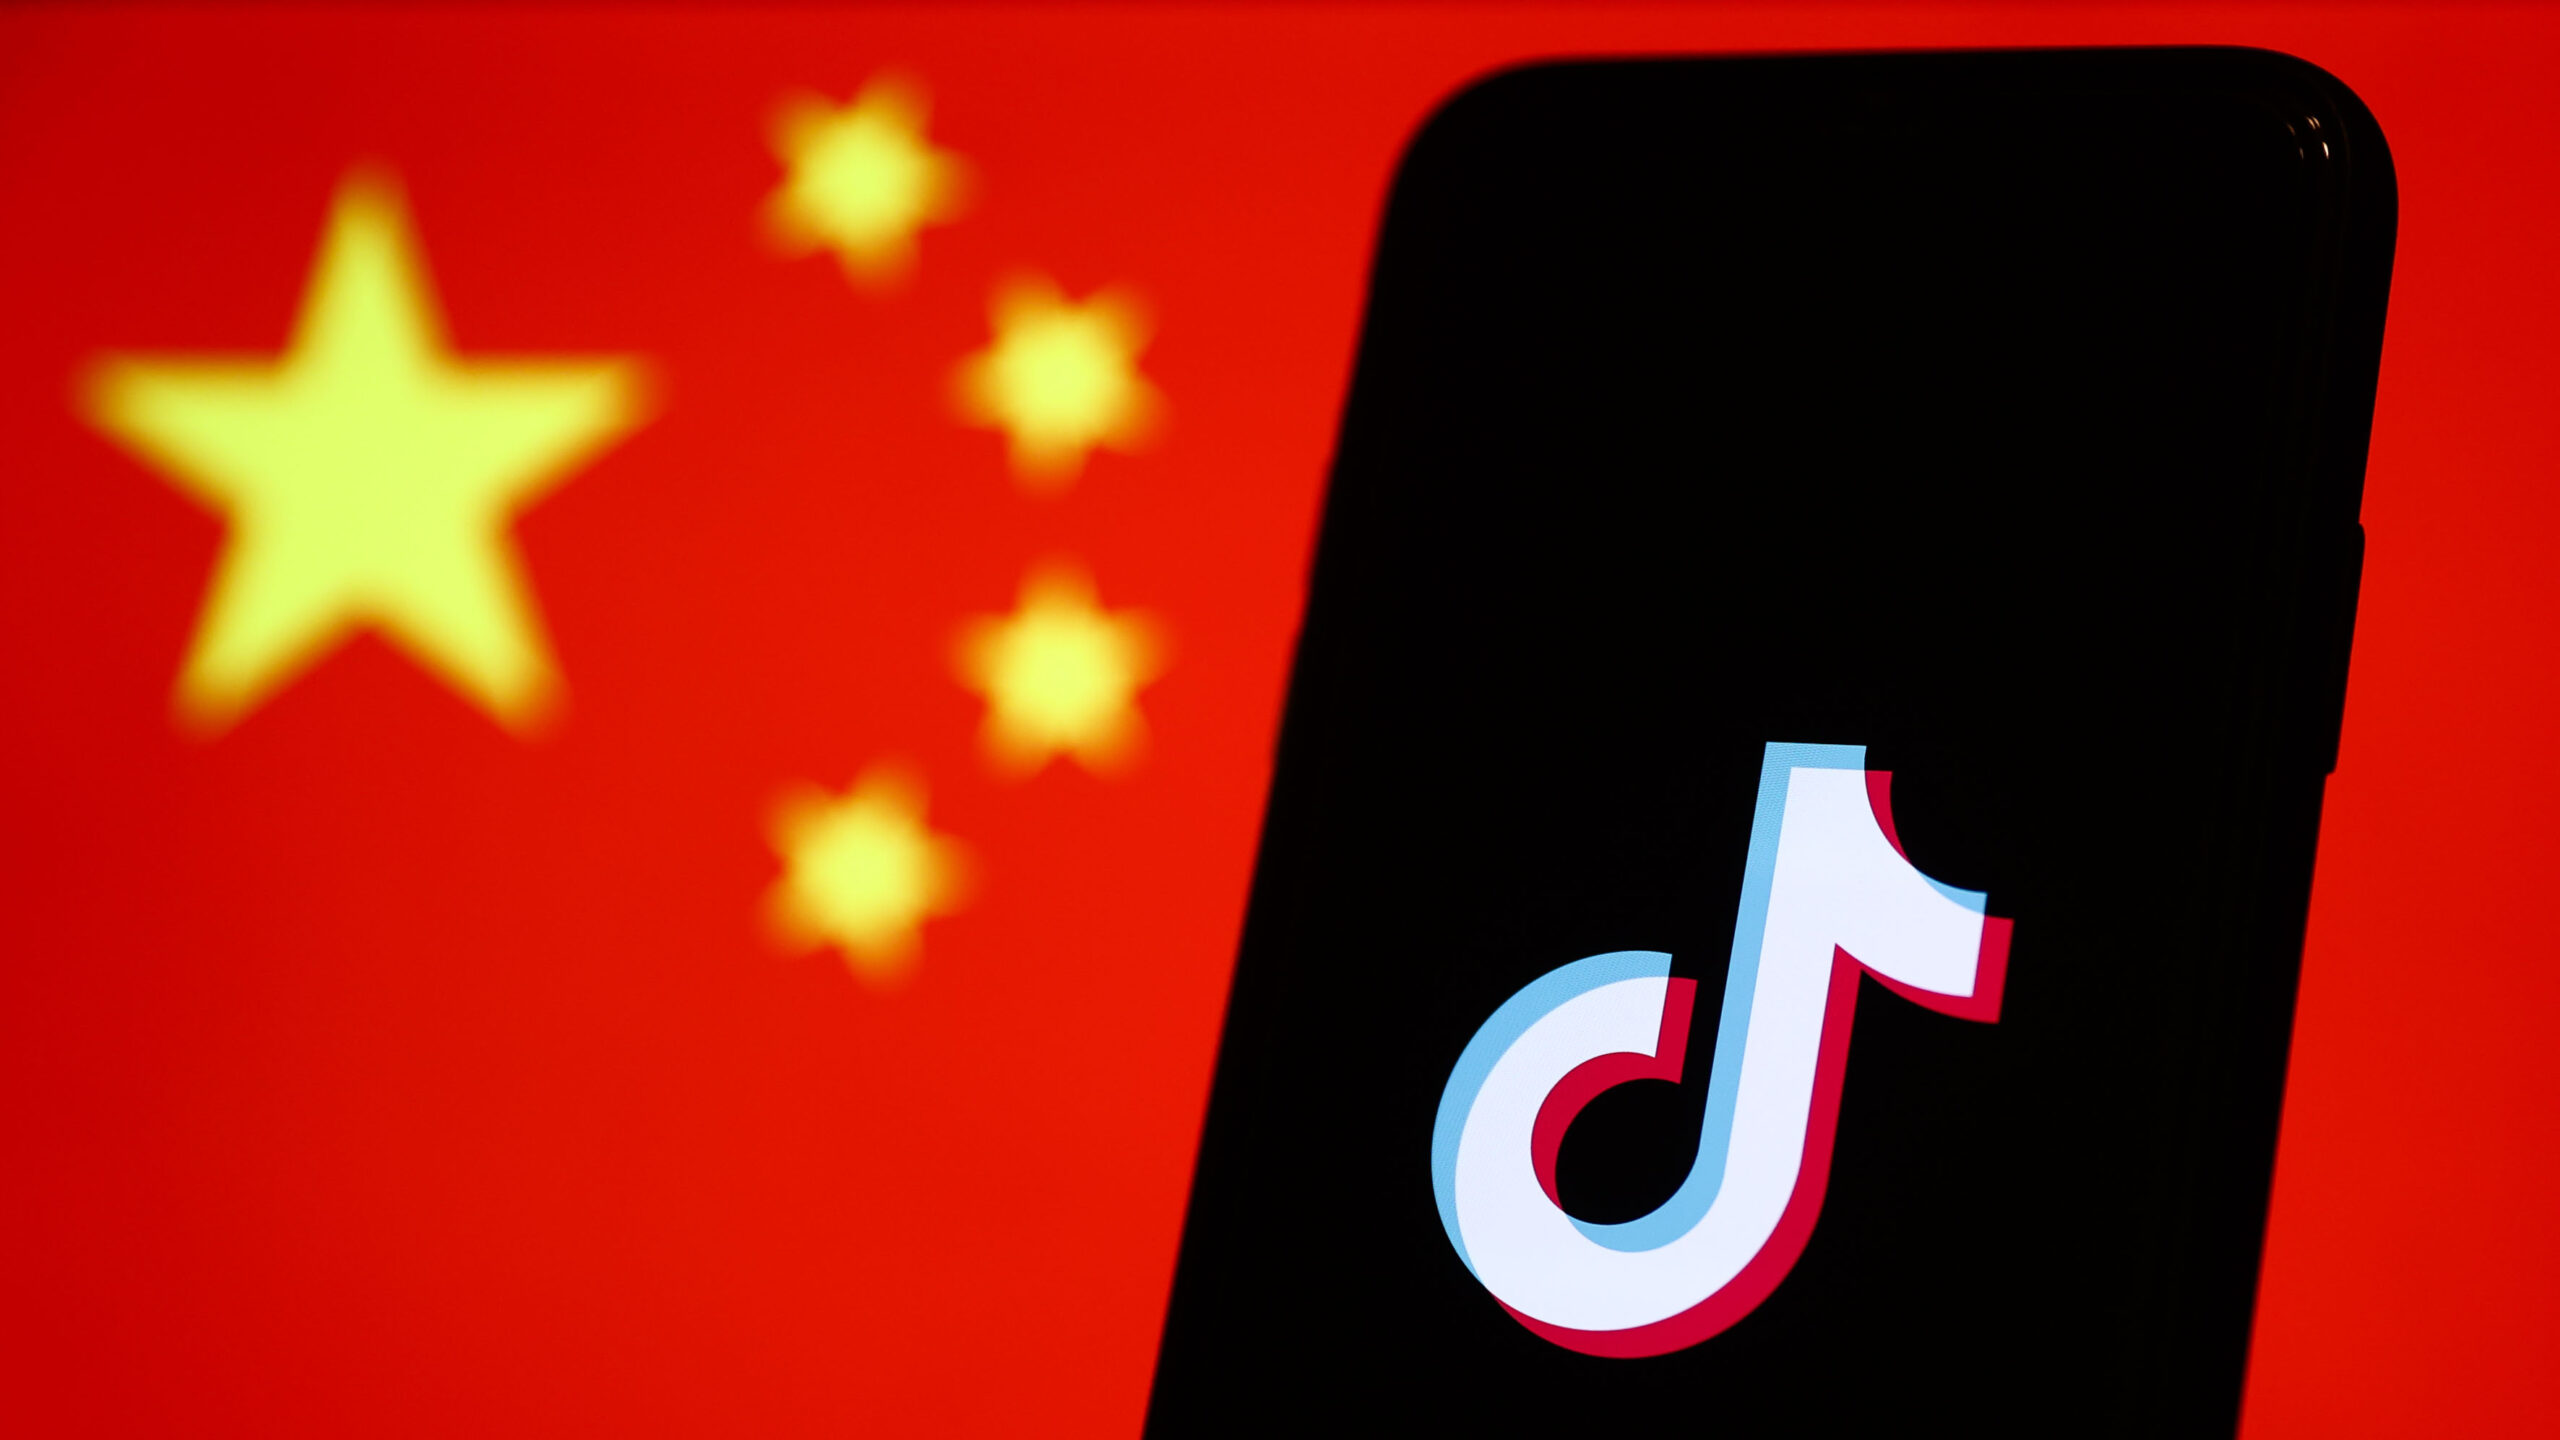 TikTok CEO Swears Company Is ‘Not An Agent Of China’